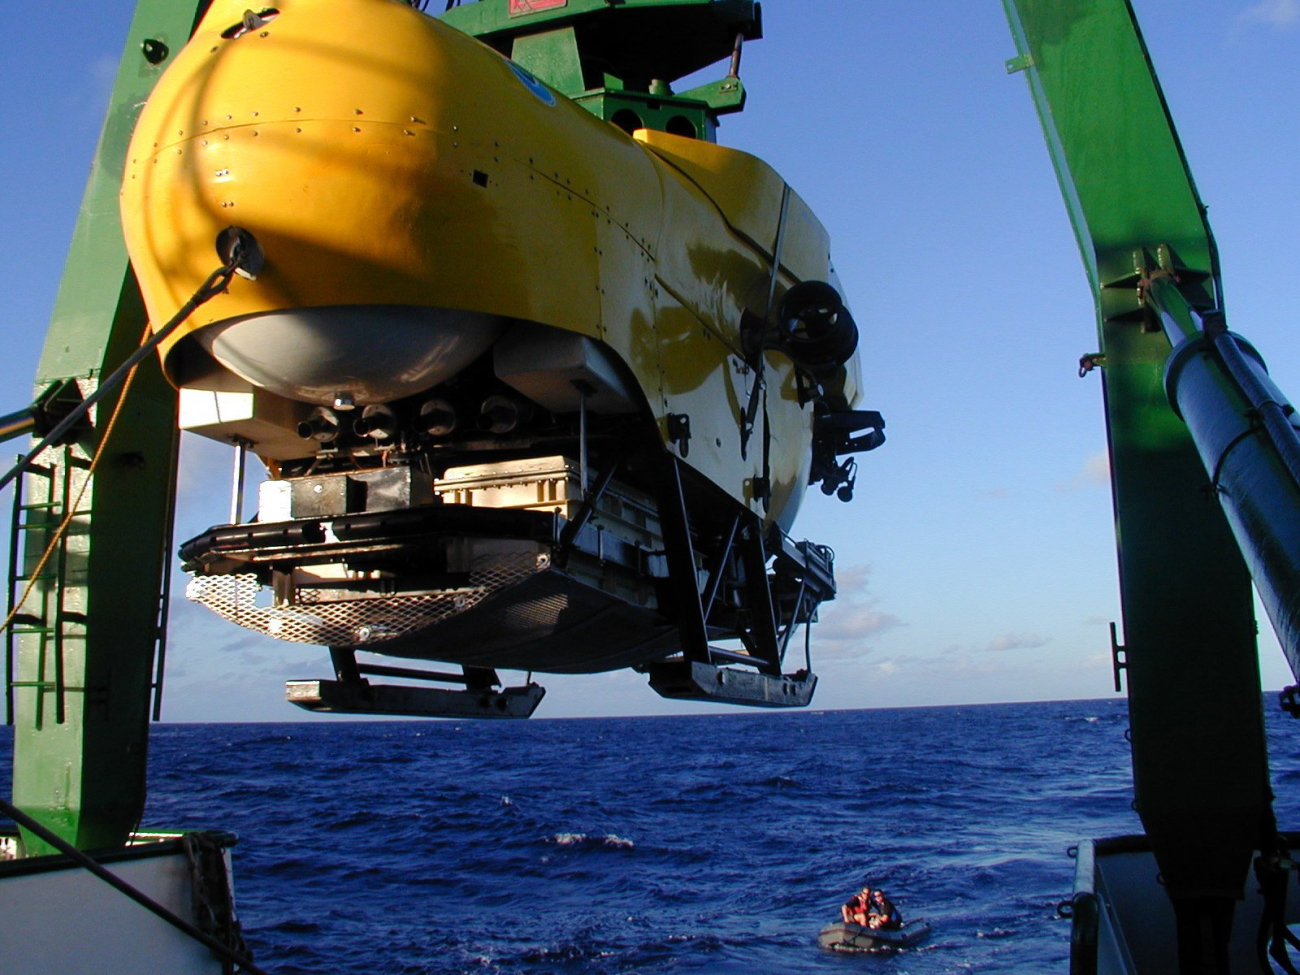 Launching Pisces V submersible